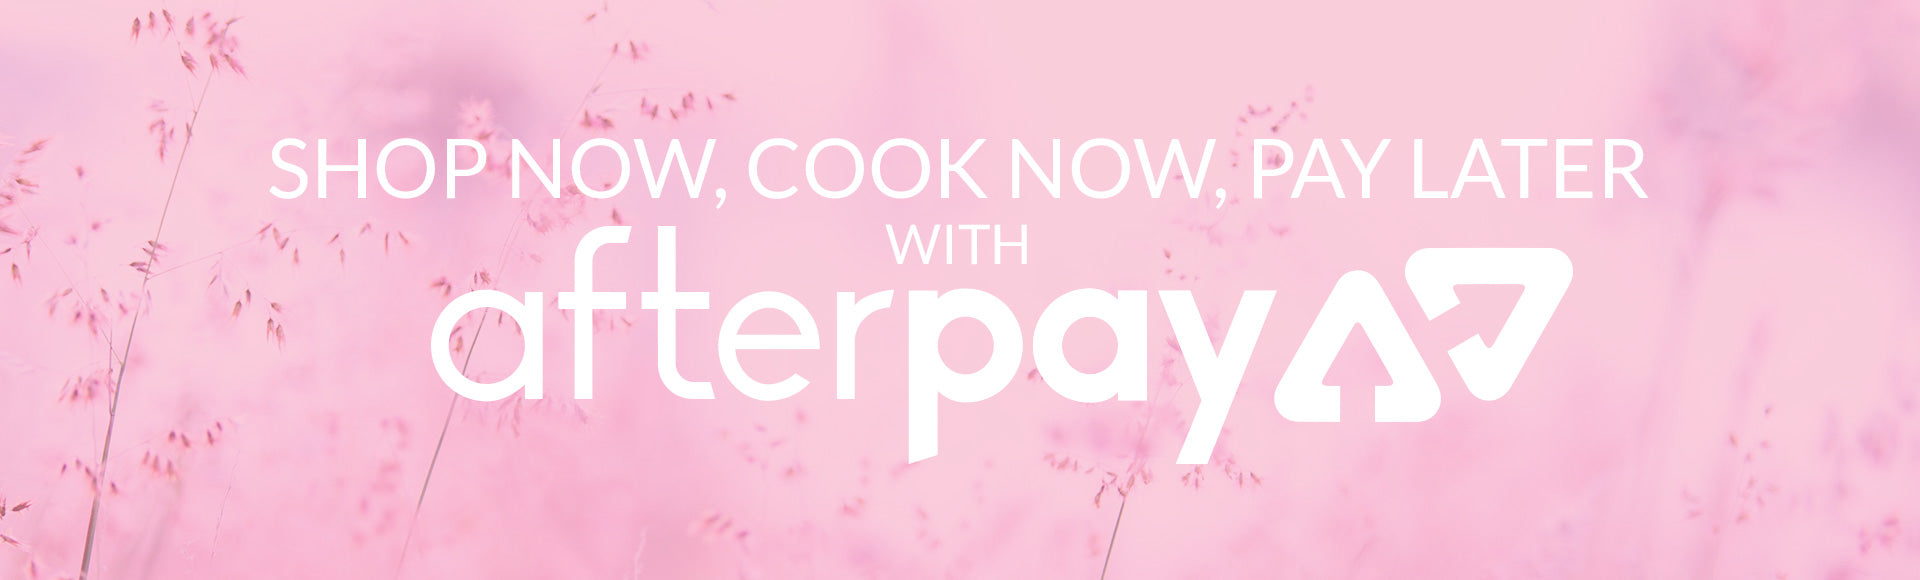 Pay later with Afterpay